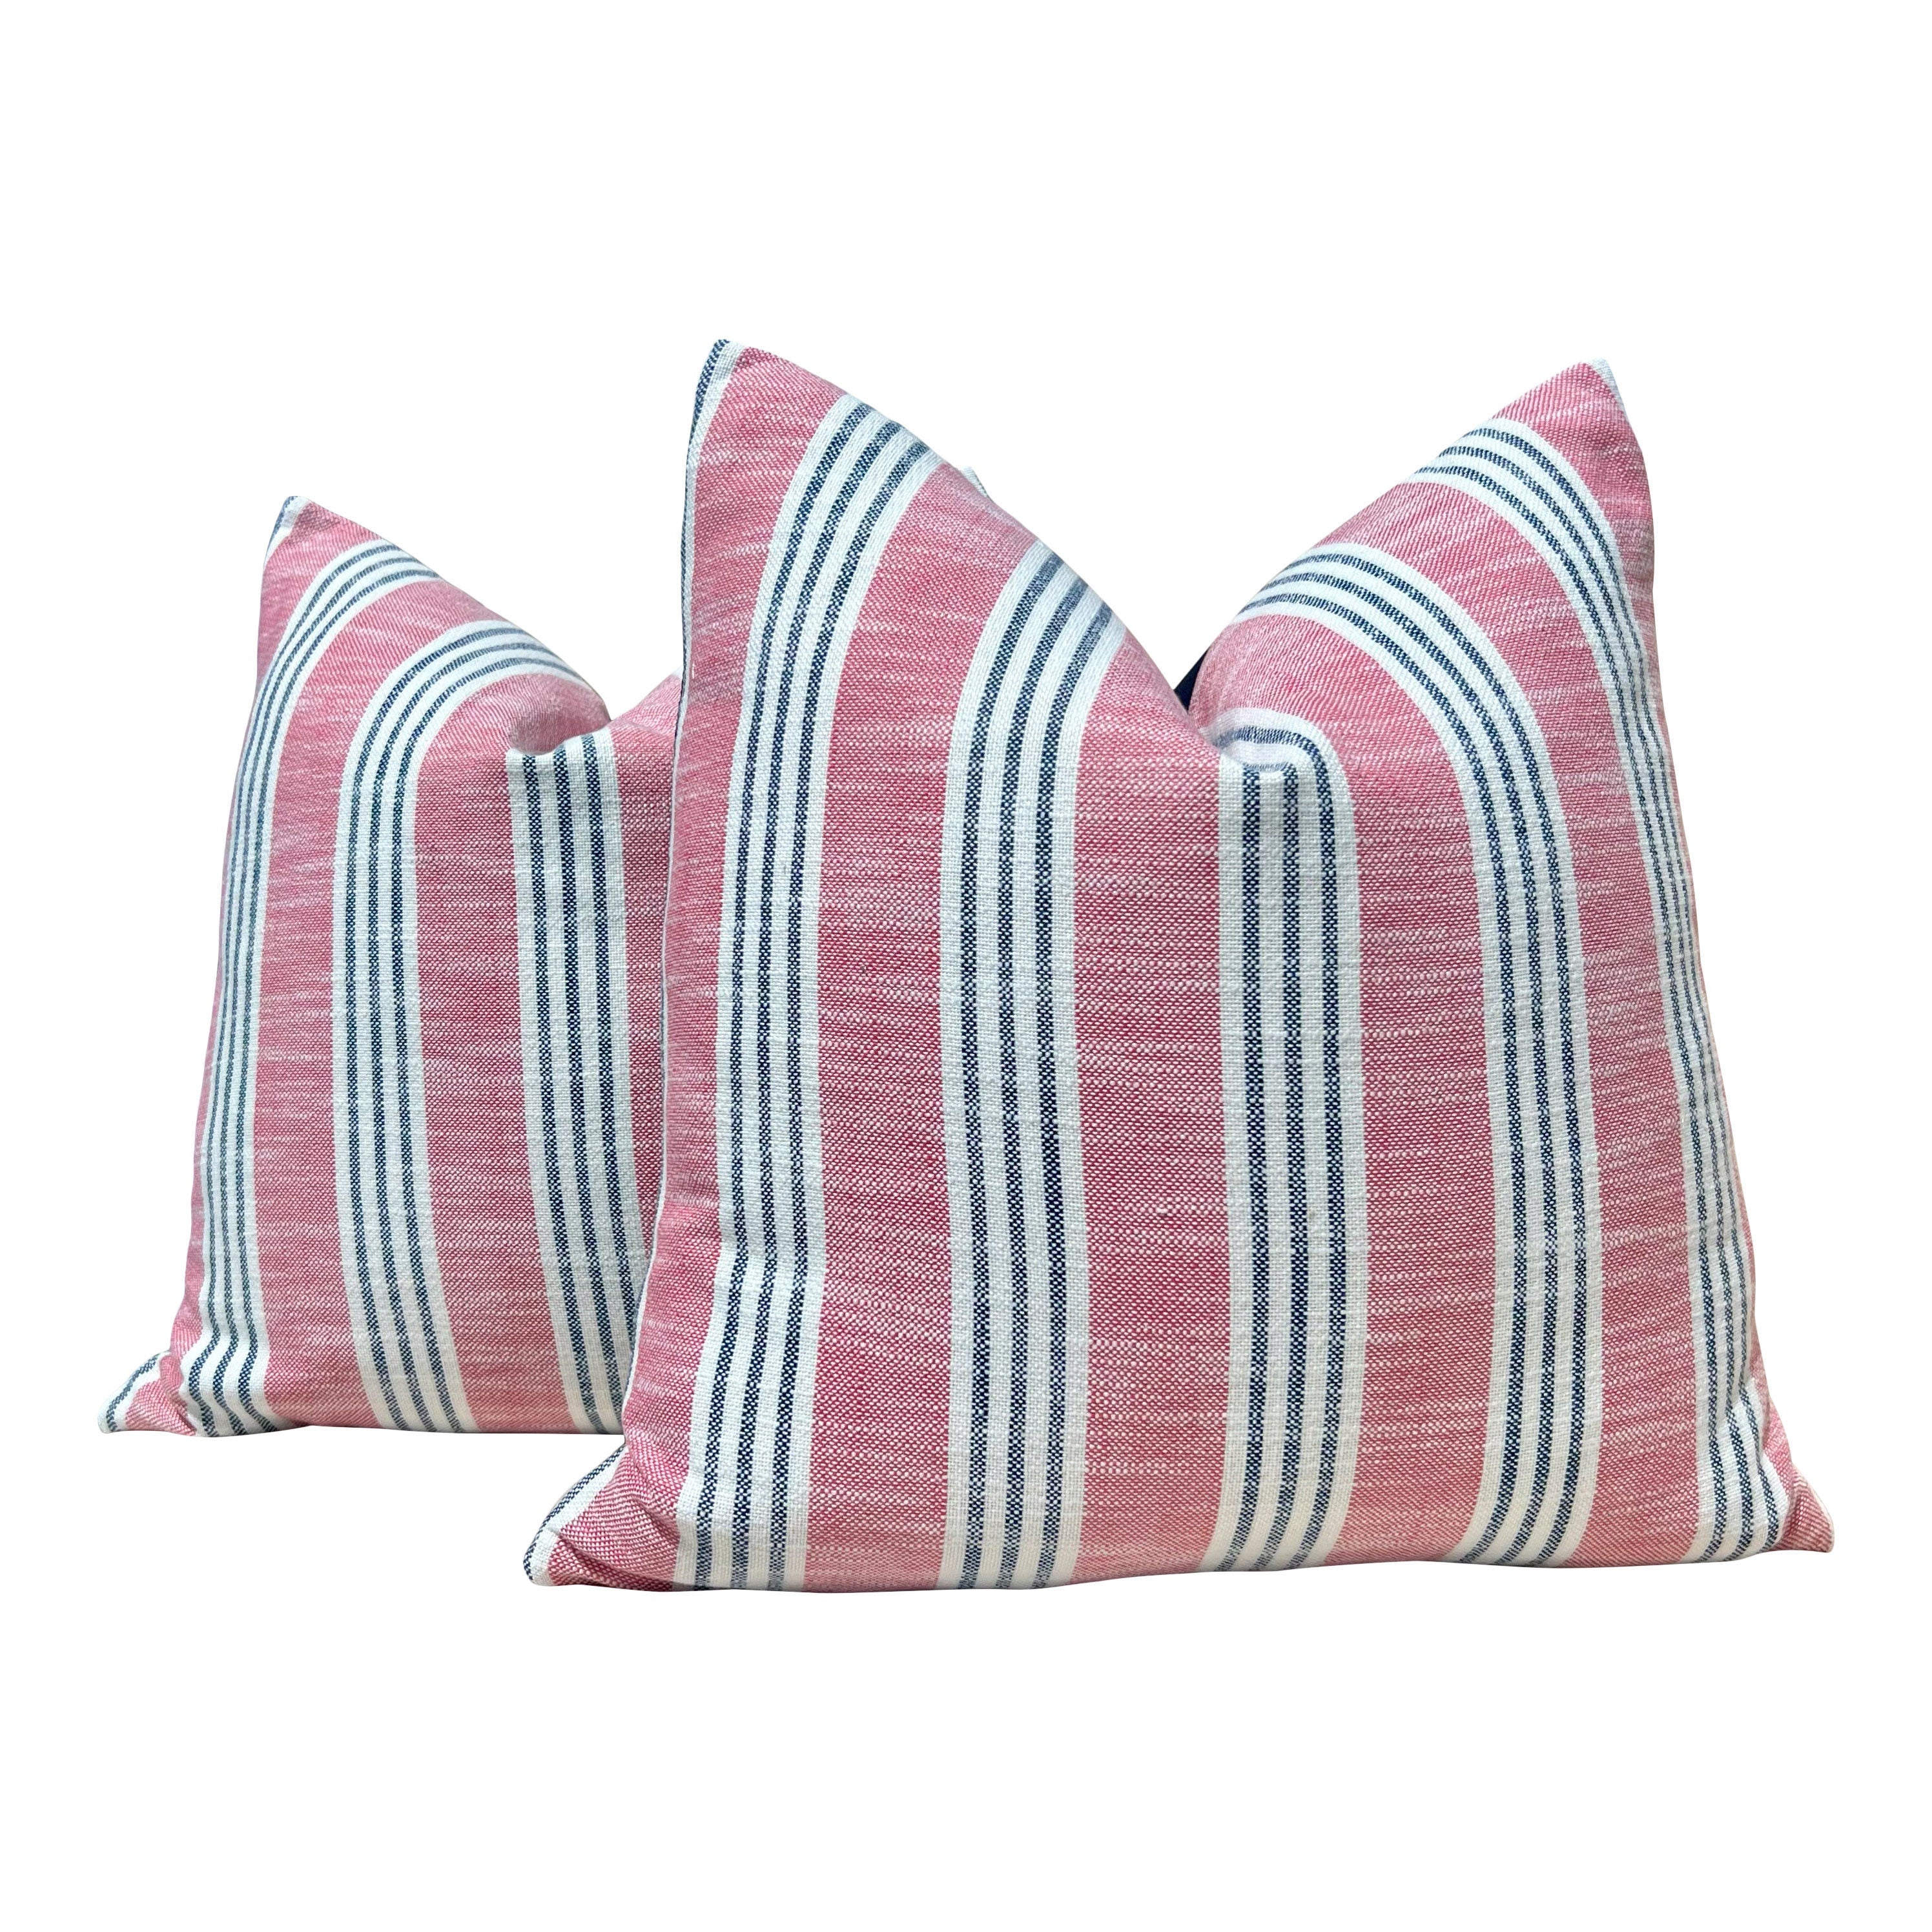 Thibaut Indoor/Outdoor Woven Southport Stripe Pillow in Peony and Navy. Outdoor Striped Pillow Cover Pink and Dark Blue Accent Lumbar